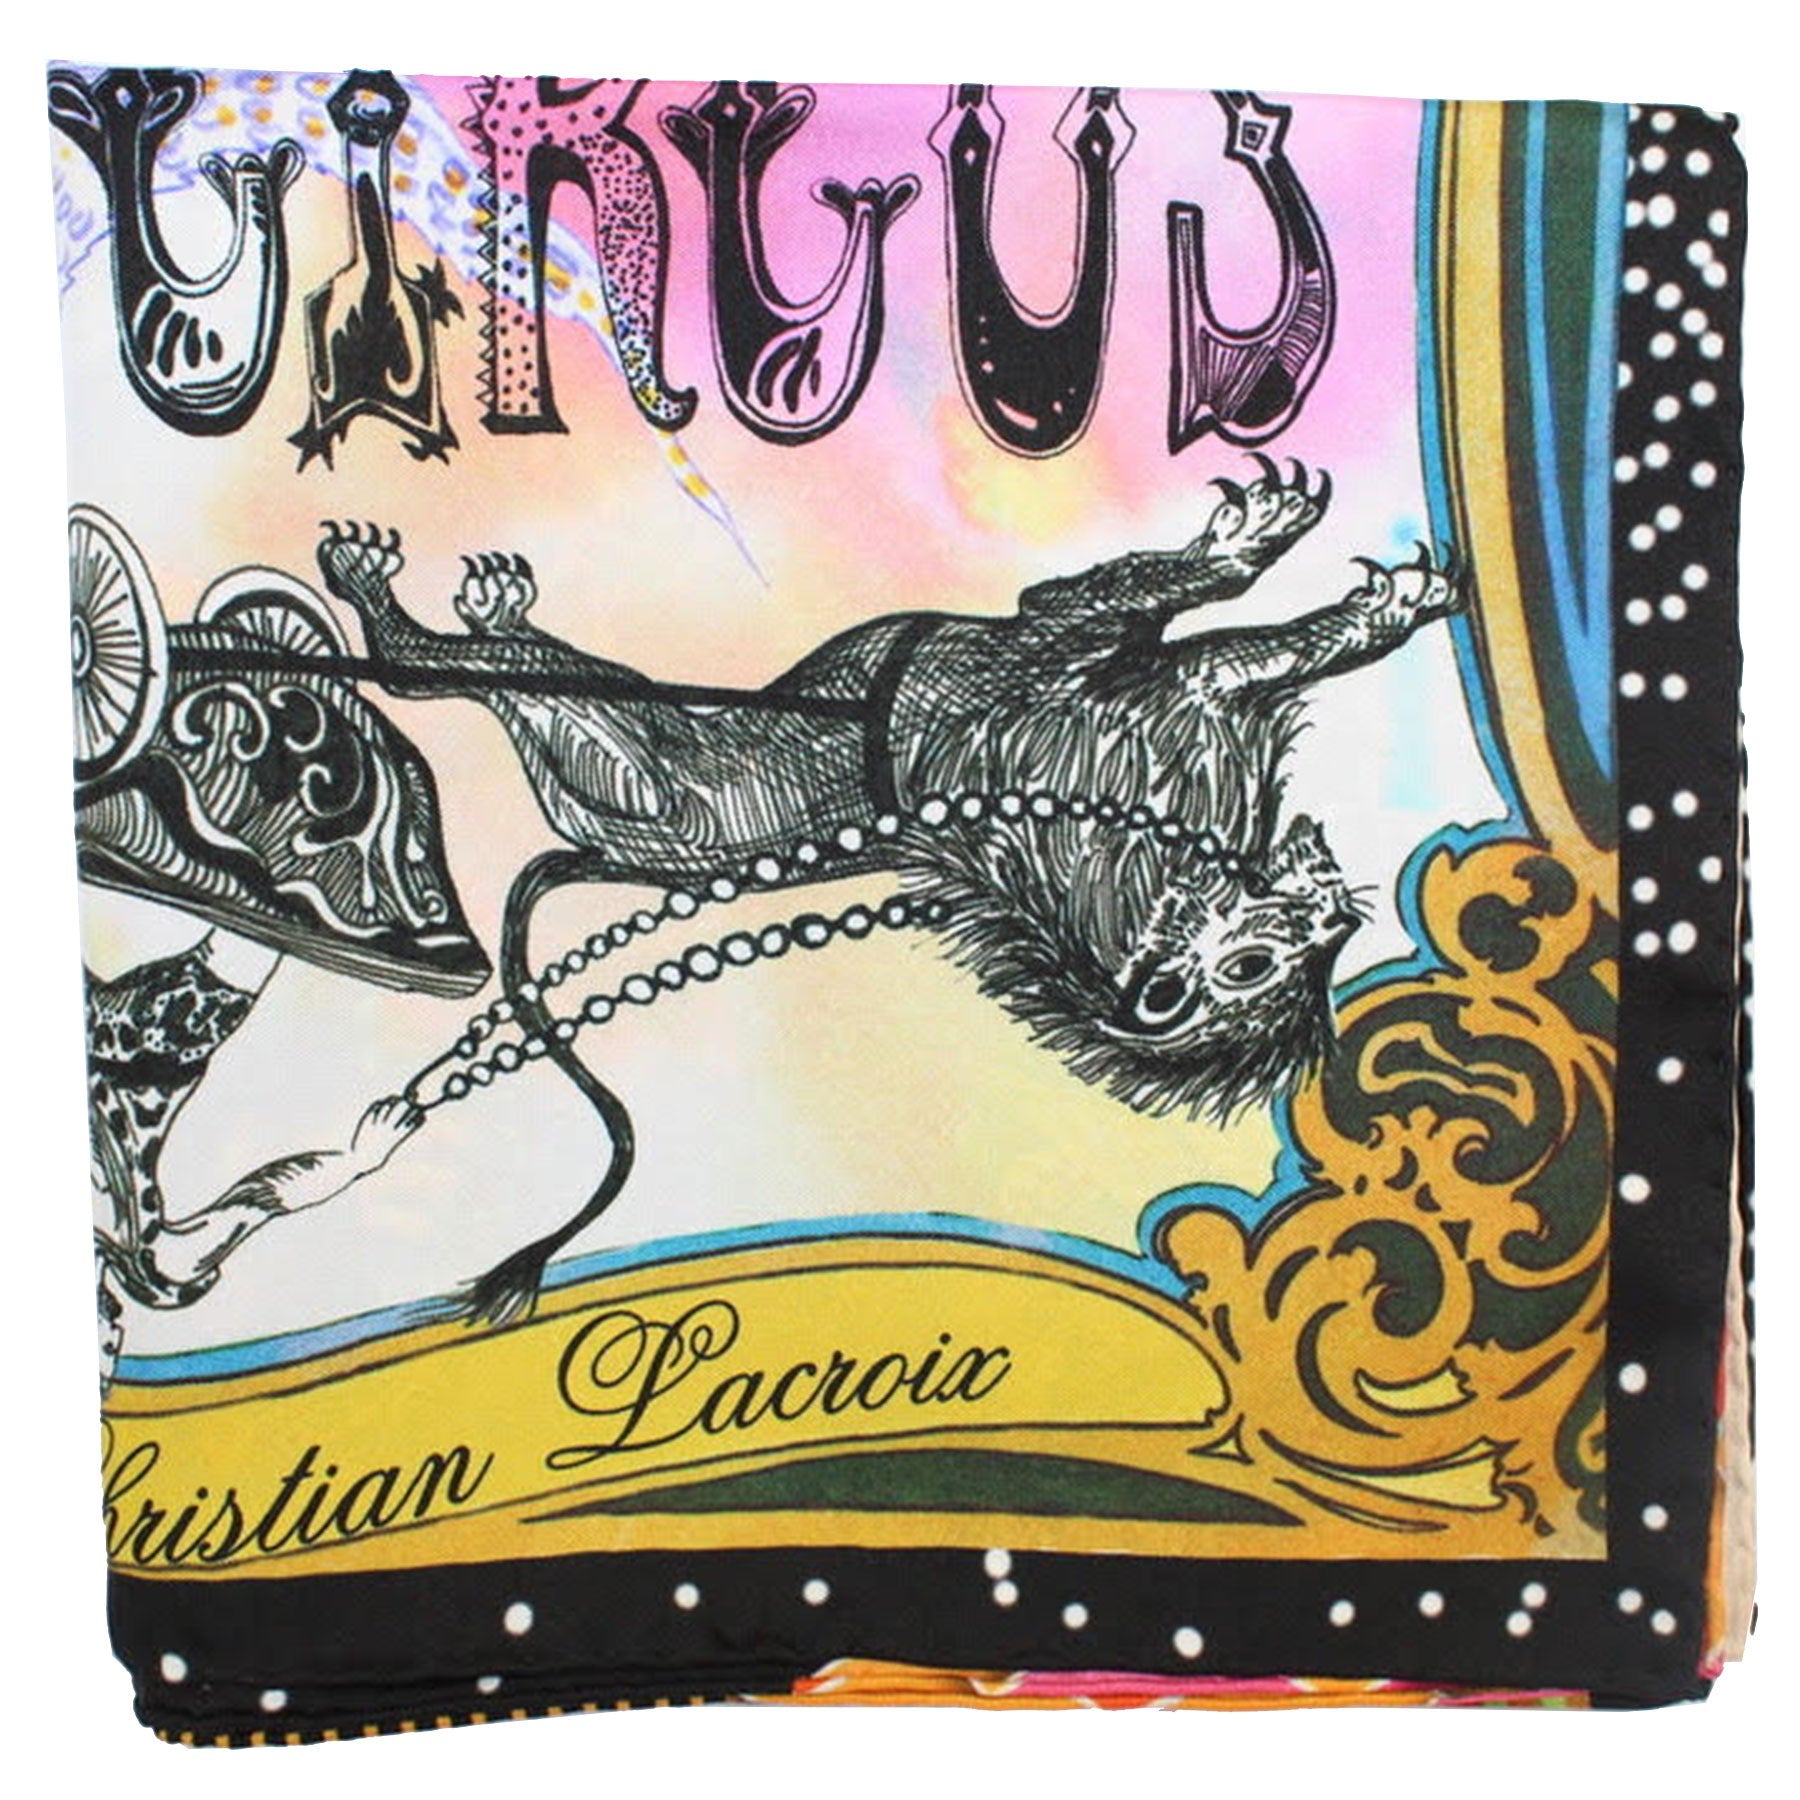 Christian Lacroix Scarf 20 Ans Design Multi color Circus Novelty - Large Twill Silk Square Scarf